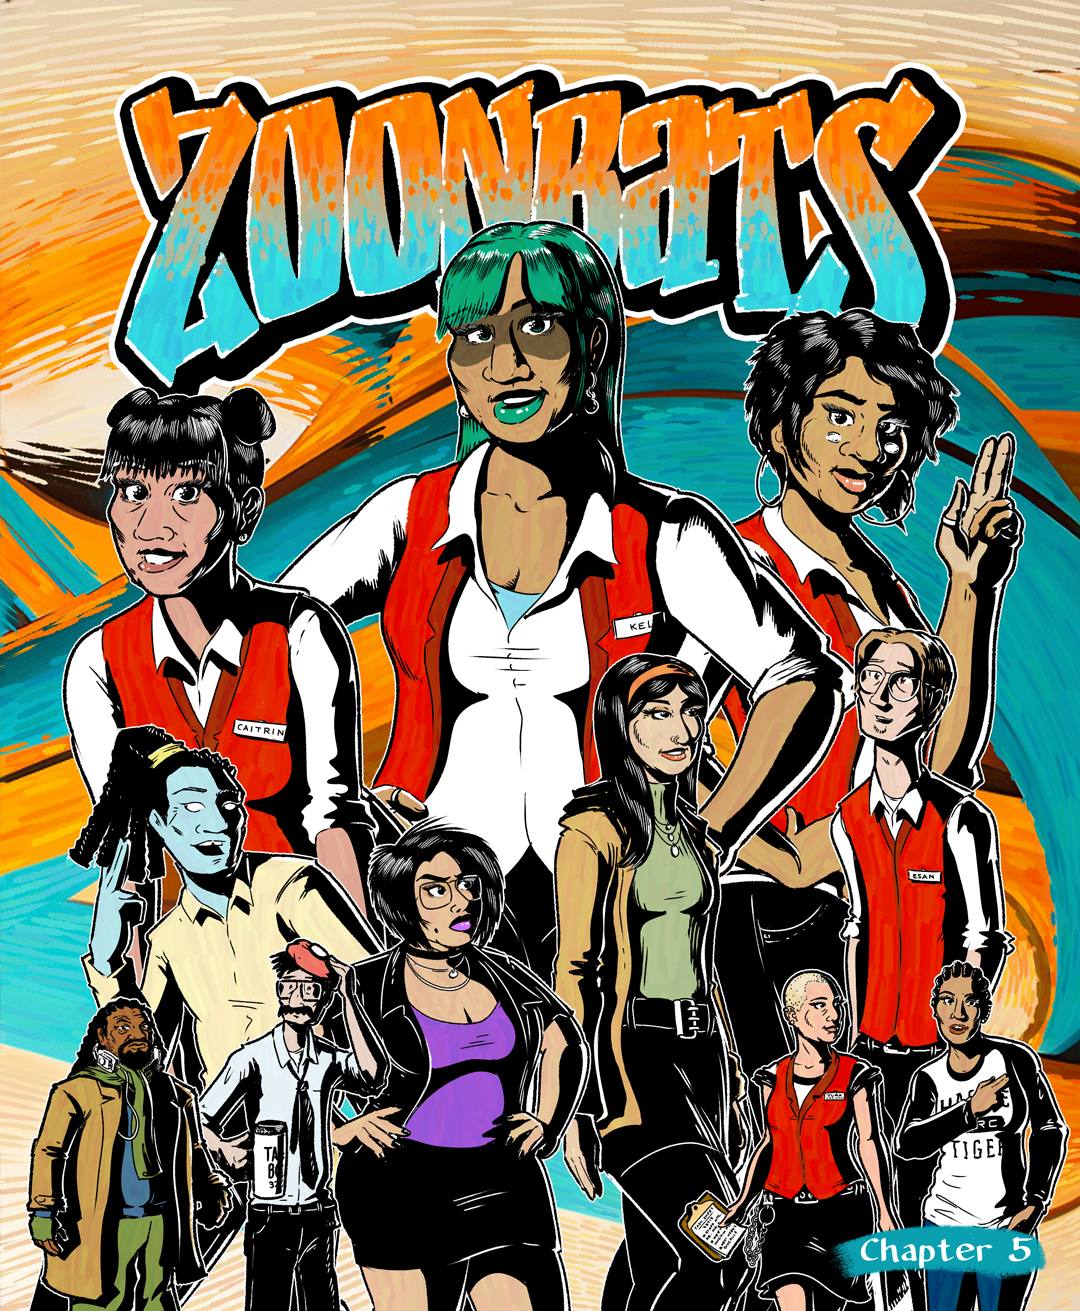 A thumbnail image of the cover of Chapter 5, depicting the ensemble cast of crew members at the Belladonna Theatre: Caitrin, Kel, Bloom, Pazil, Nora, Marli, Esan, Murray, and Yura, as well as the community members Dieko and Kina who live and work nearby.